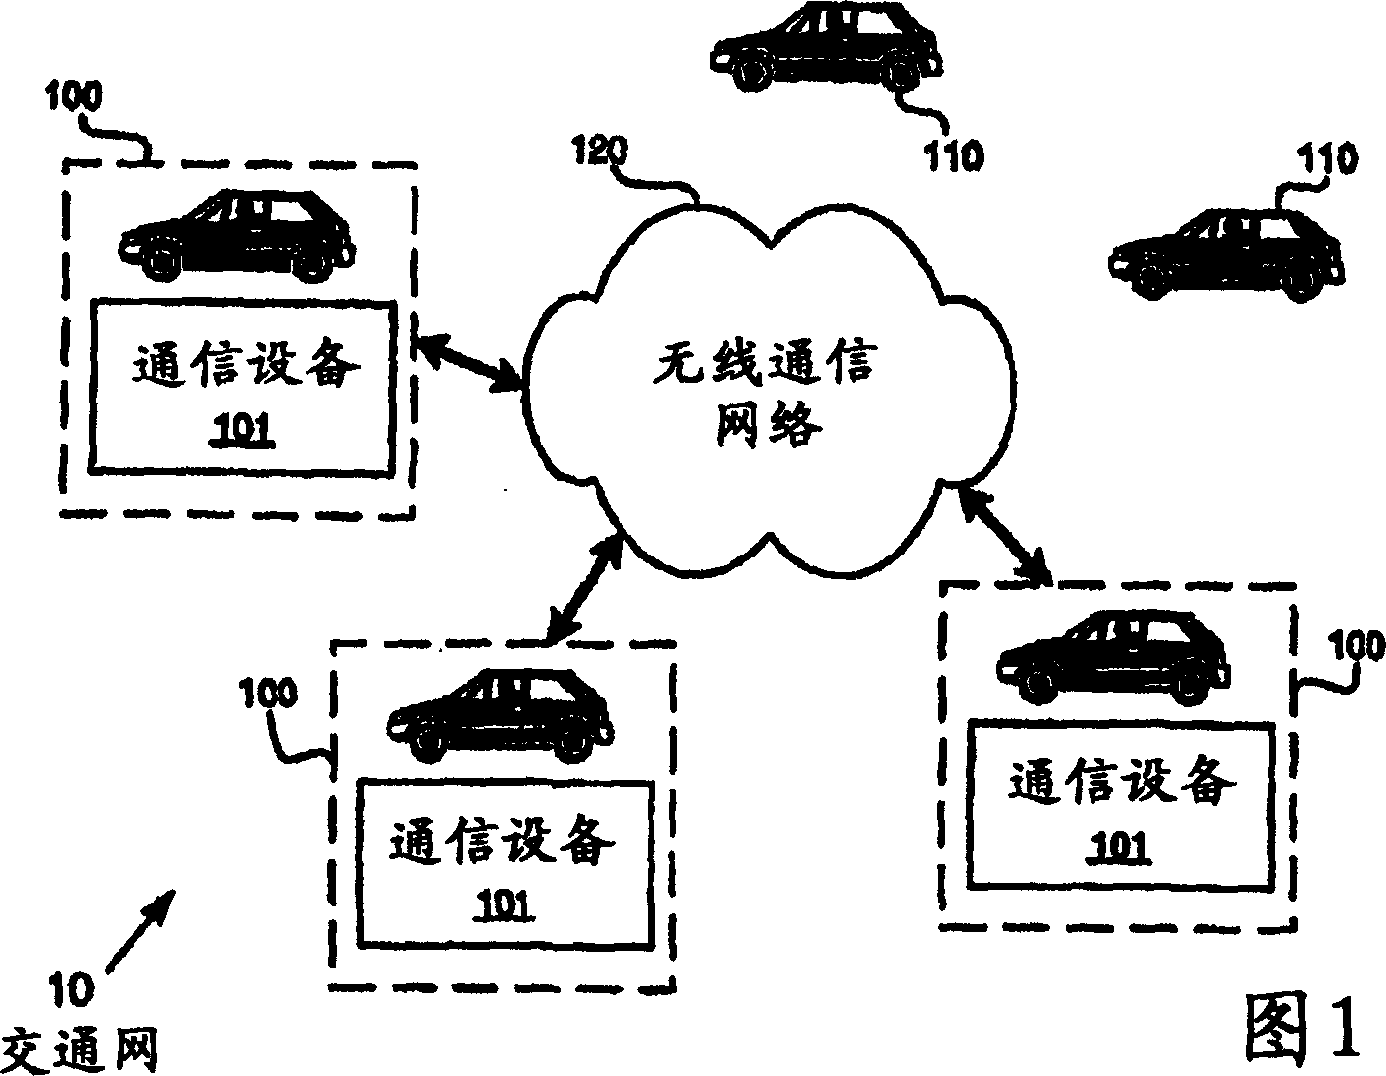 Enhanced mobile communication device and transportation application